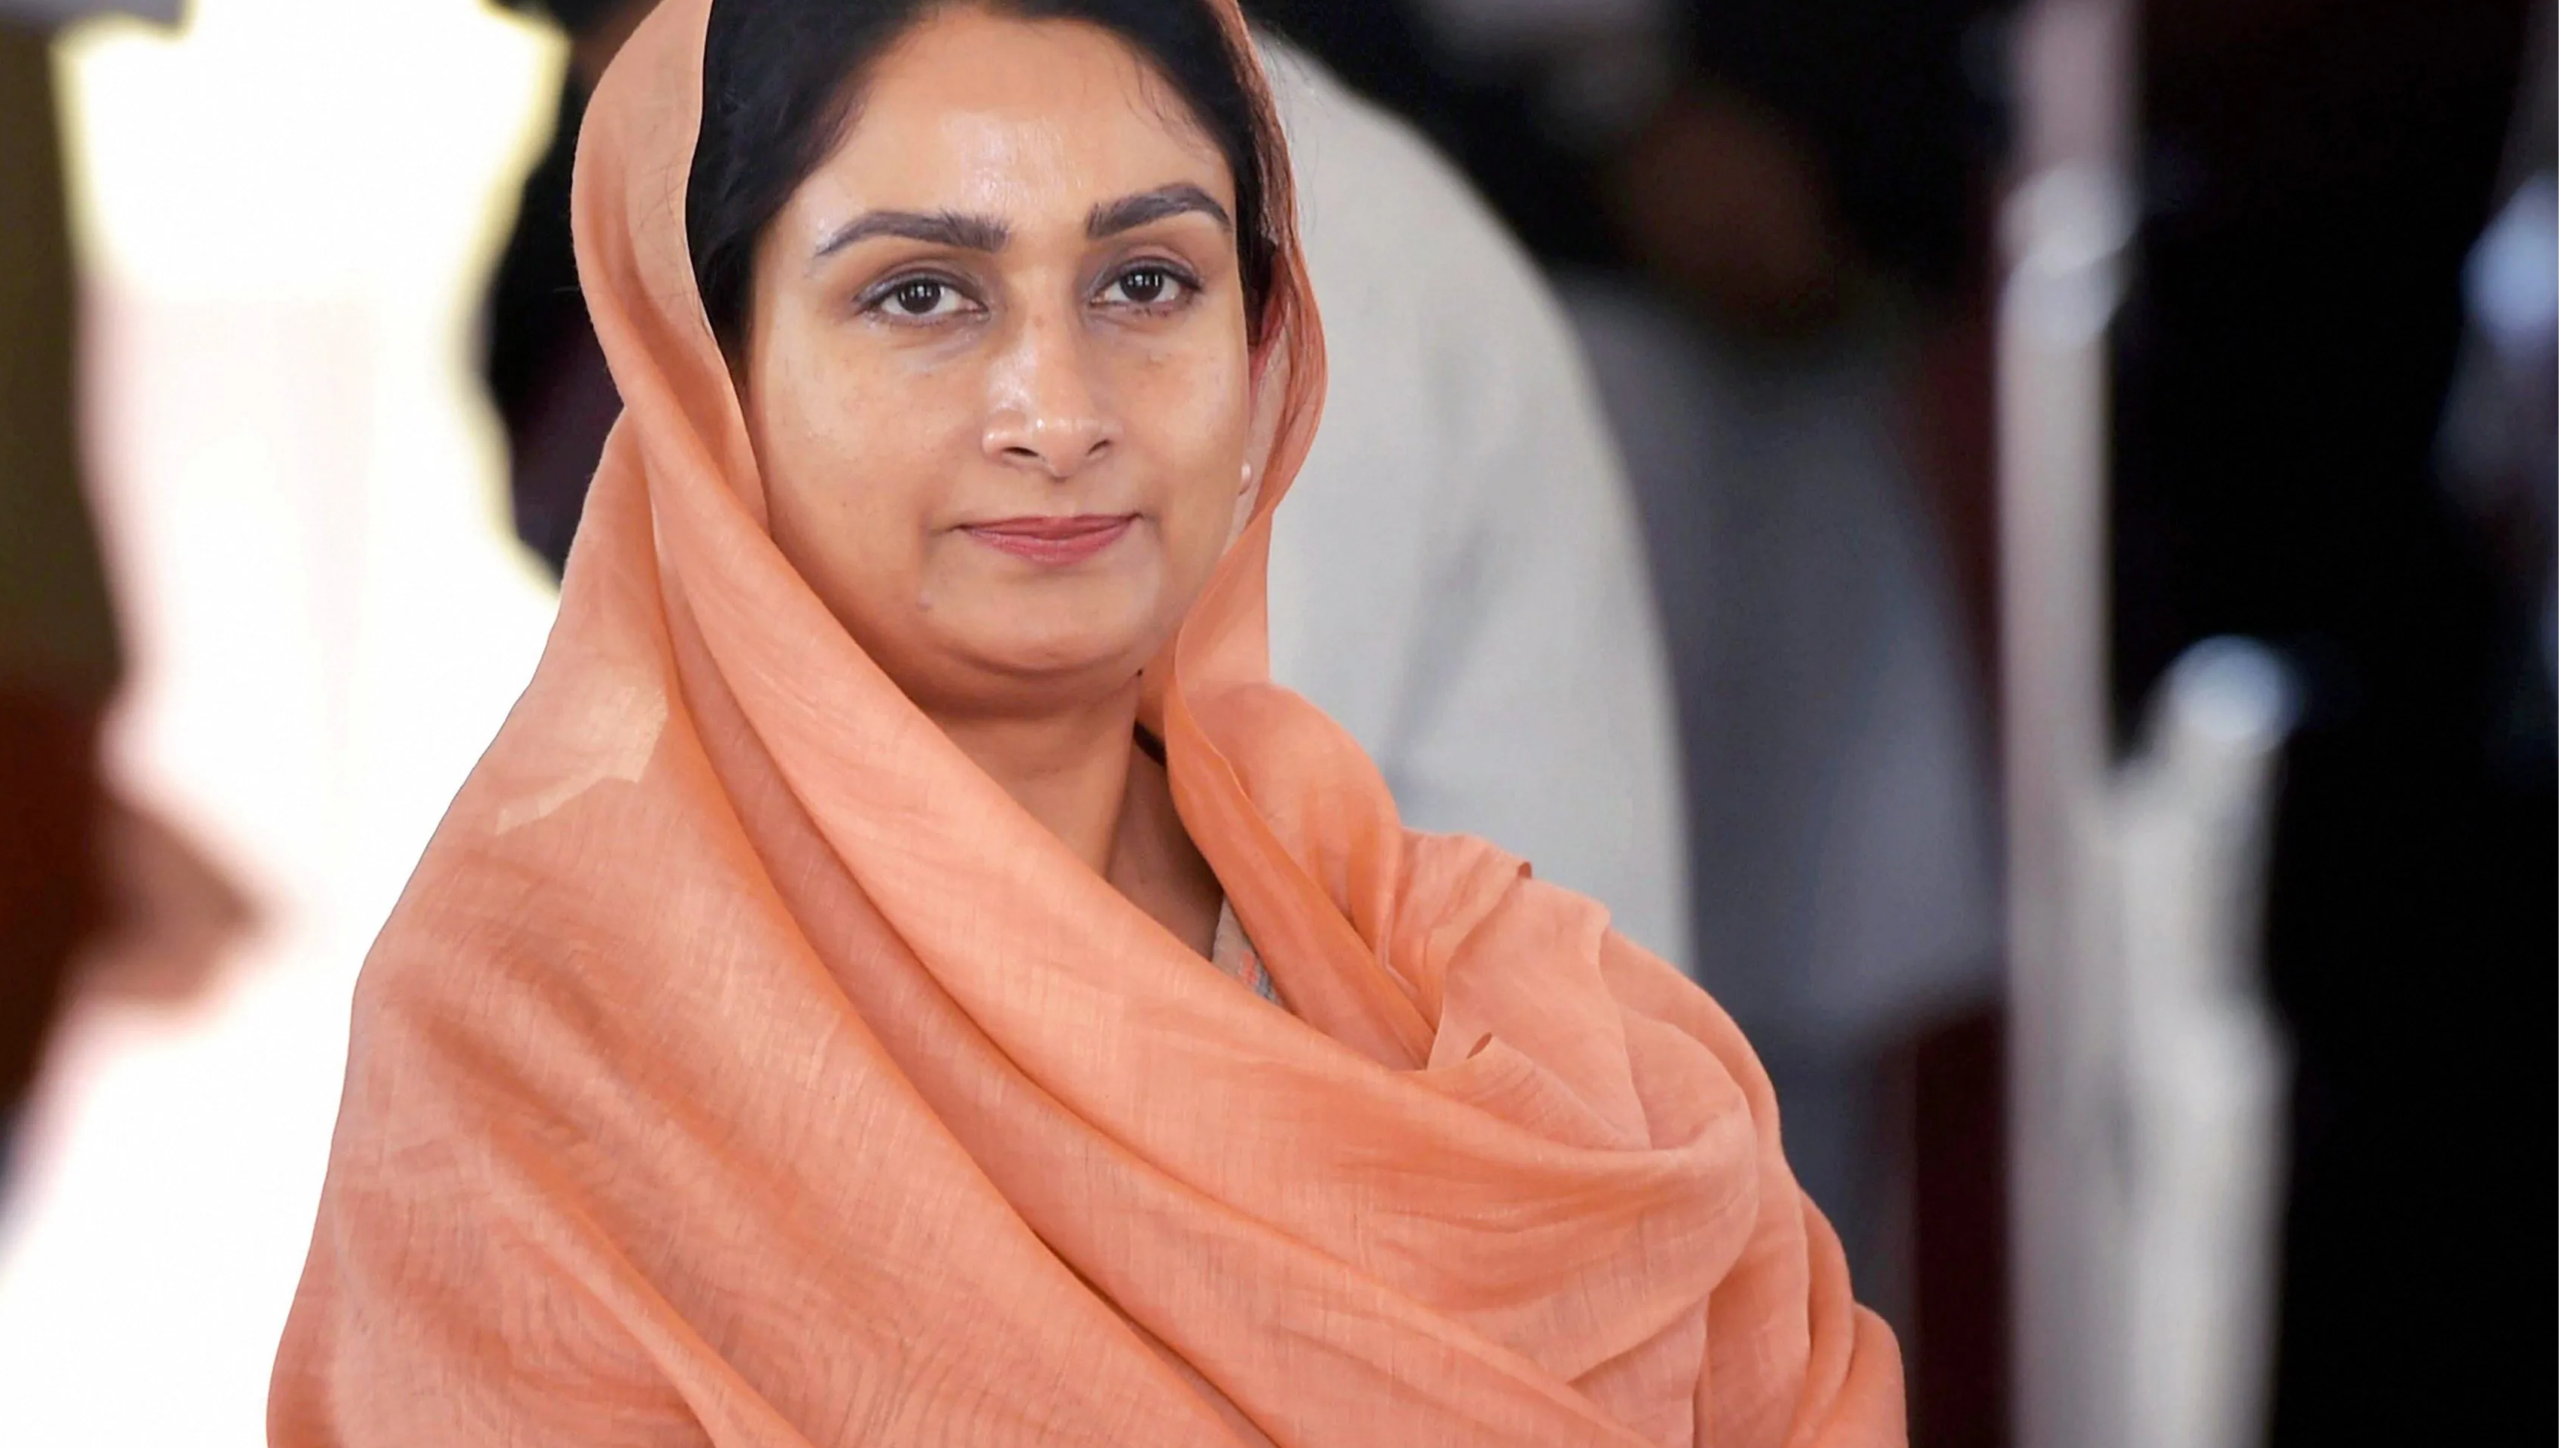 Harsimrat Kaur Badal says she is ‘saddened’ as her voice in support of farmers was not heard